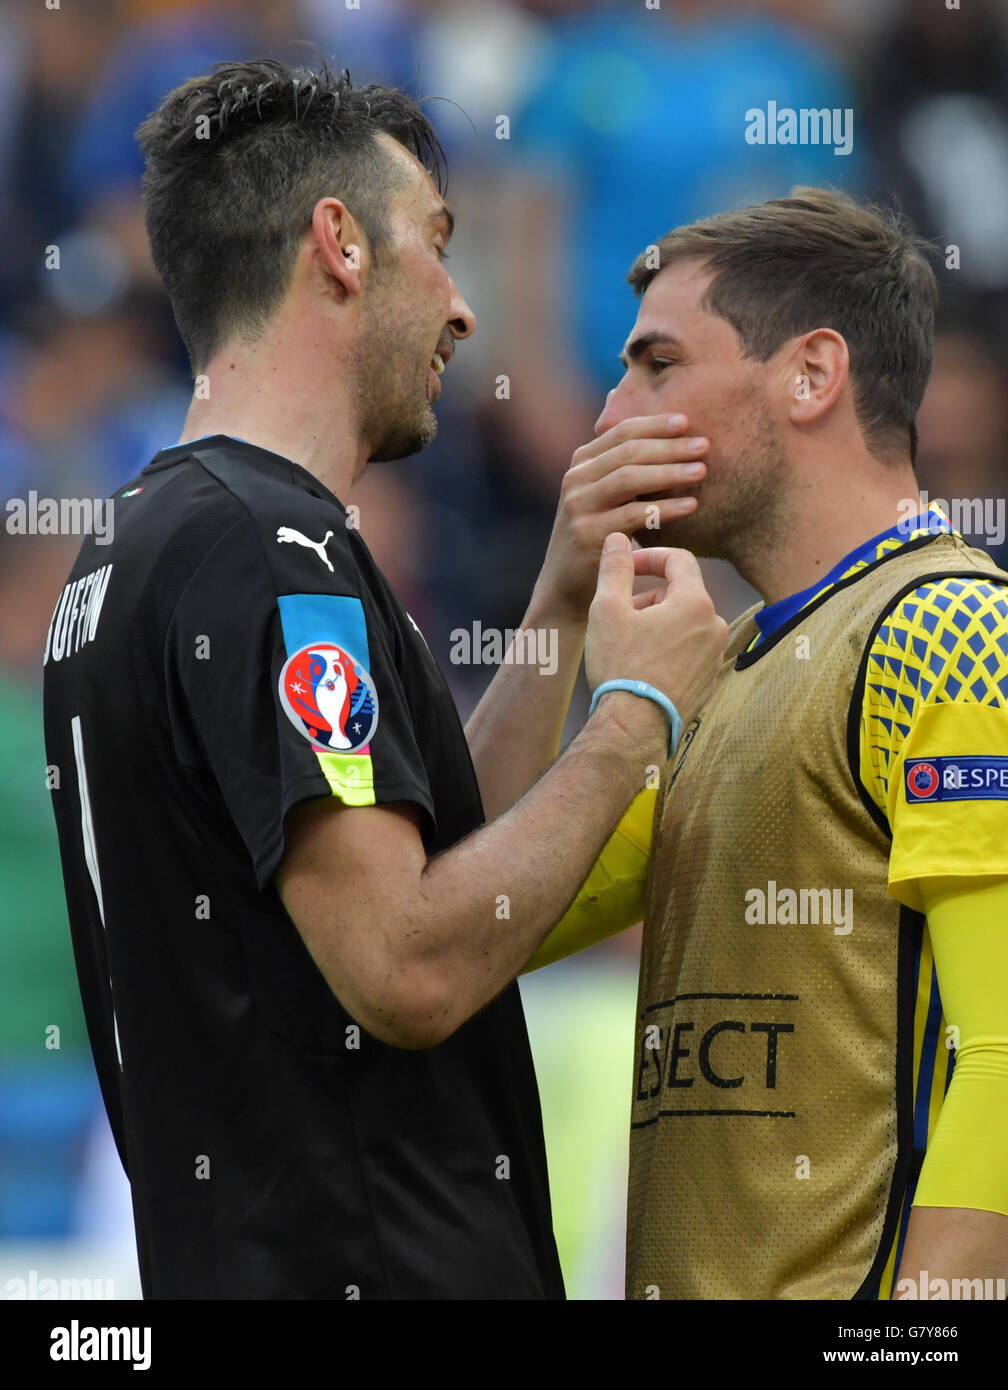 Goalkeeper Gianluigi Buffon (L) of Italy talks to goalkeeper Iker Casillas (R) of Spain after the UEFA EURO 2016 Round of 16 soccer match between Italy and Spain at Stade de France in Saint-Denis, France, 27 June 2016. Photo: Peter Kneffel/dpa (RESTRICTIONS APPLY: For editorial news reporting purposes only. Not used for commercial or marketing purposes without prior written approval of UEFA. Images must appear as still images and must not emulate match action video footage. Photographs published in online publications (whether via the Internet or otherwise) shall have an interval of at least 2 Stock Photo